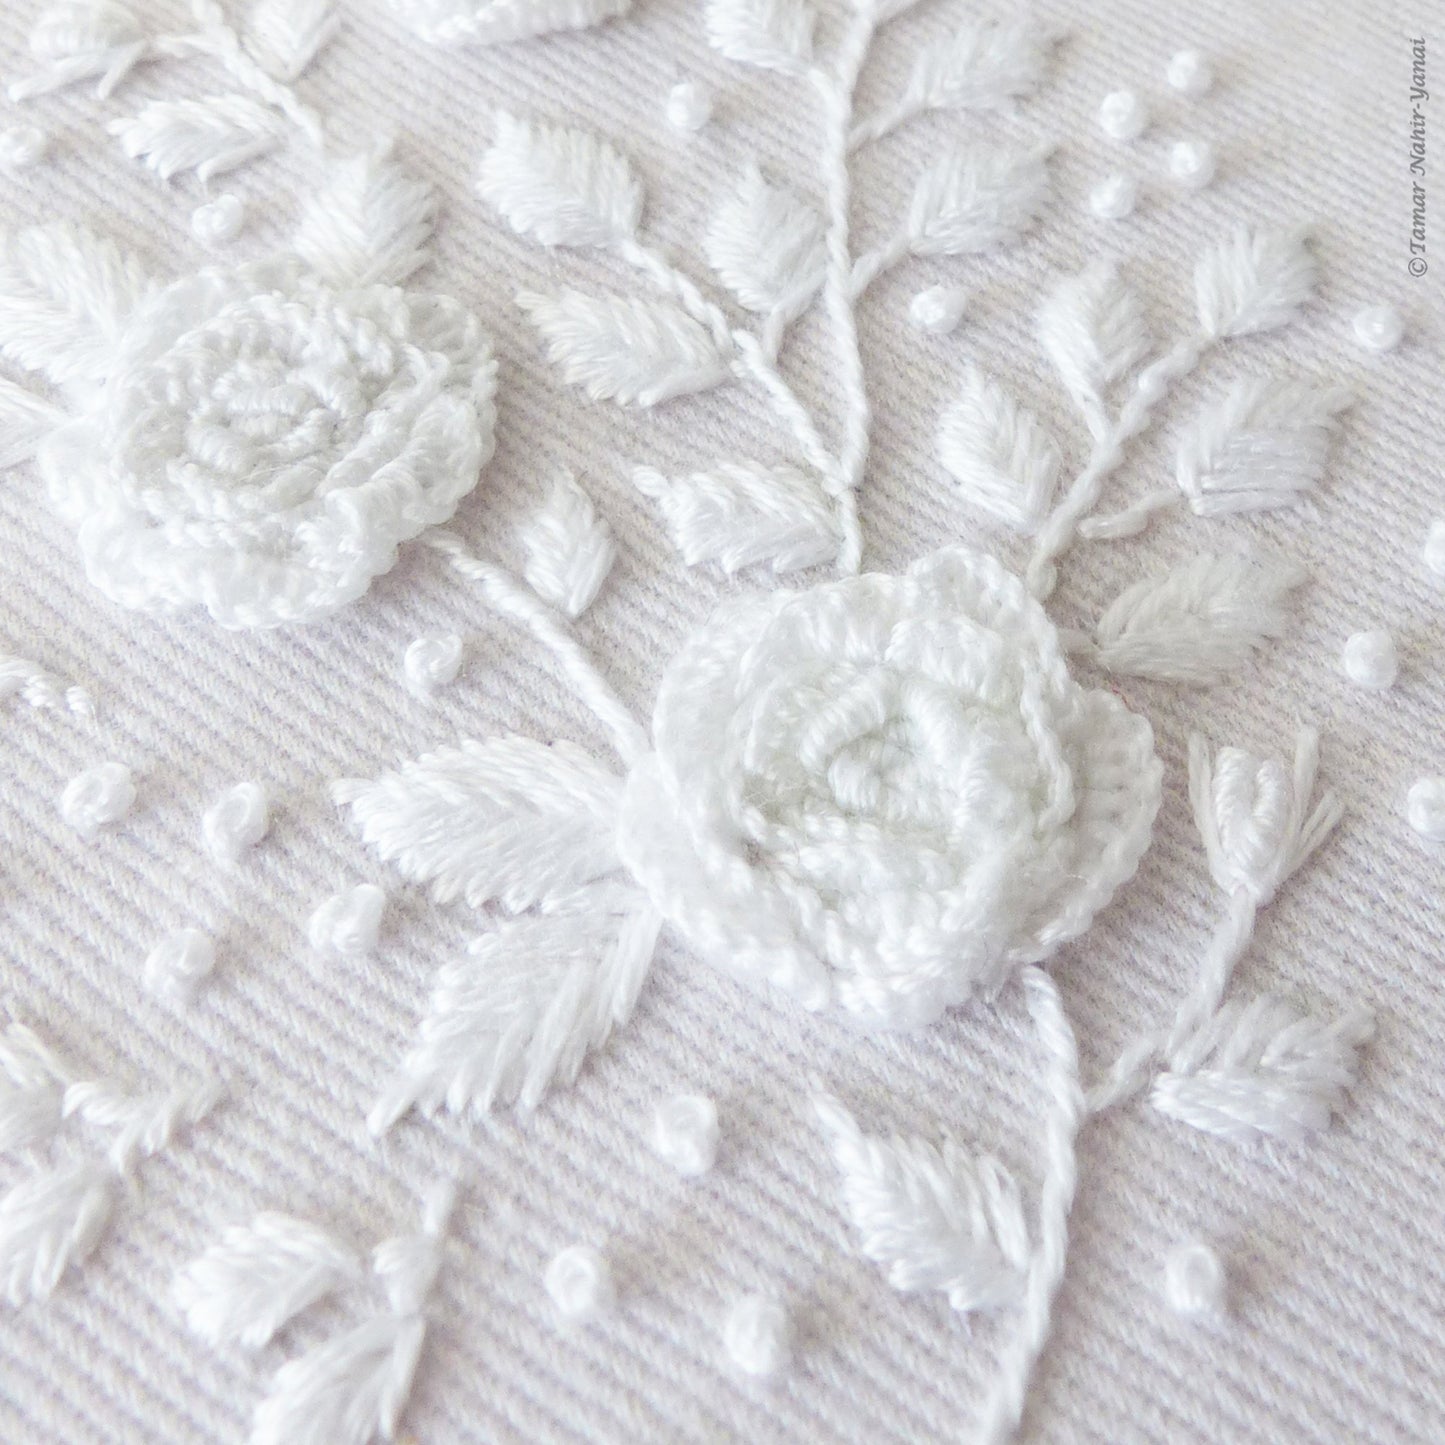 White Roses embroidery kit